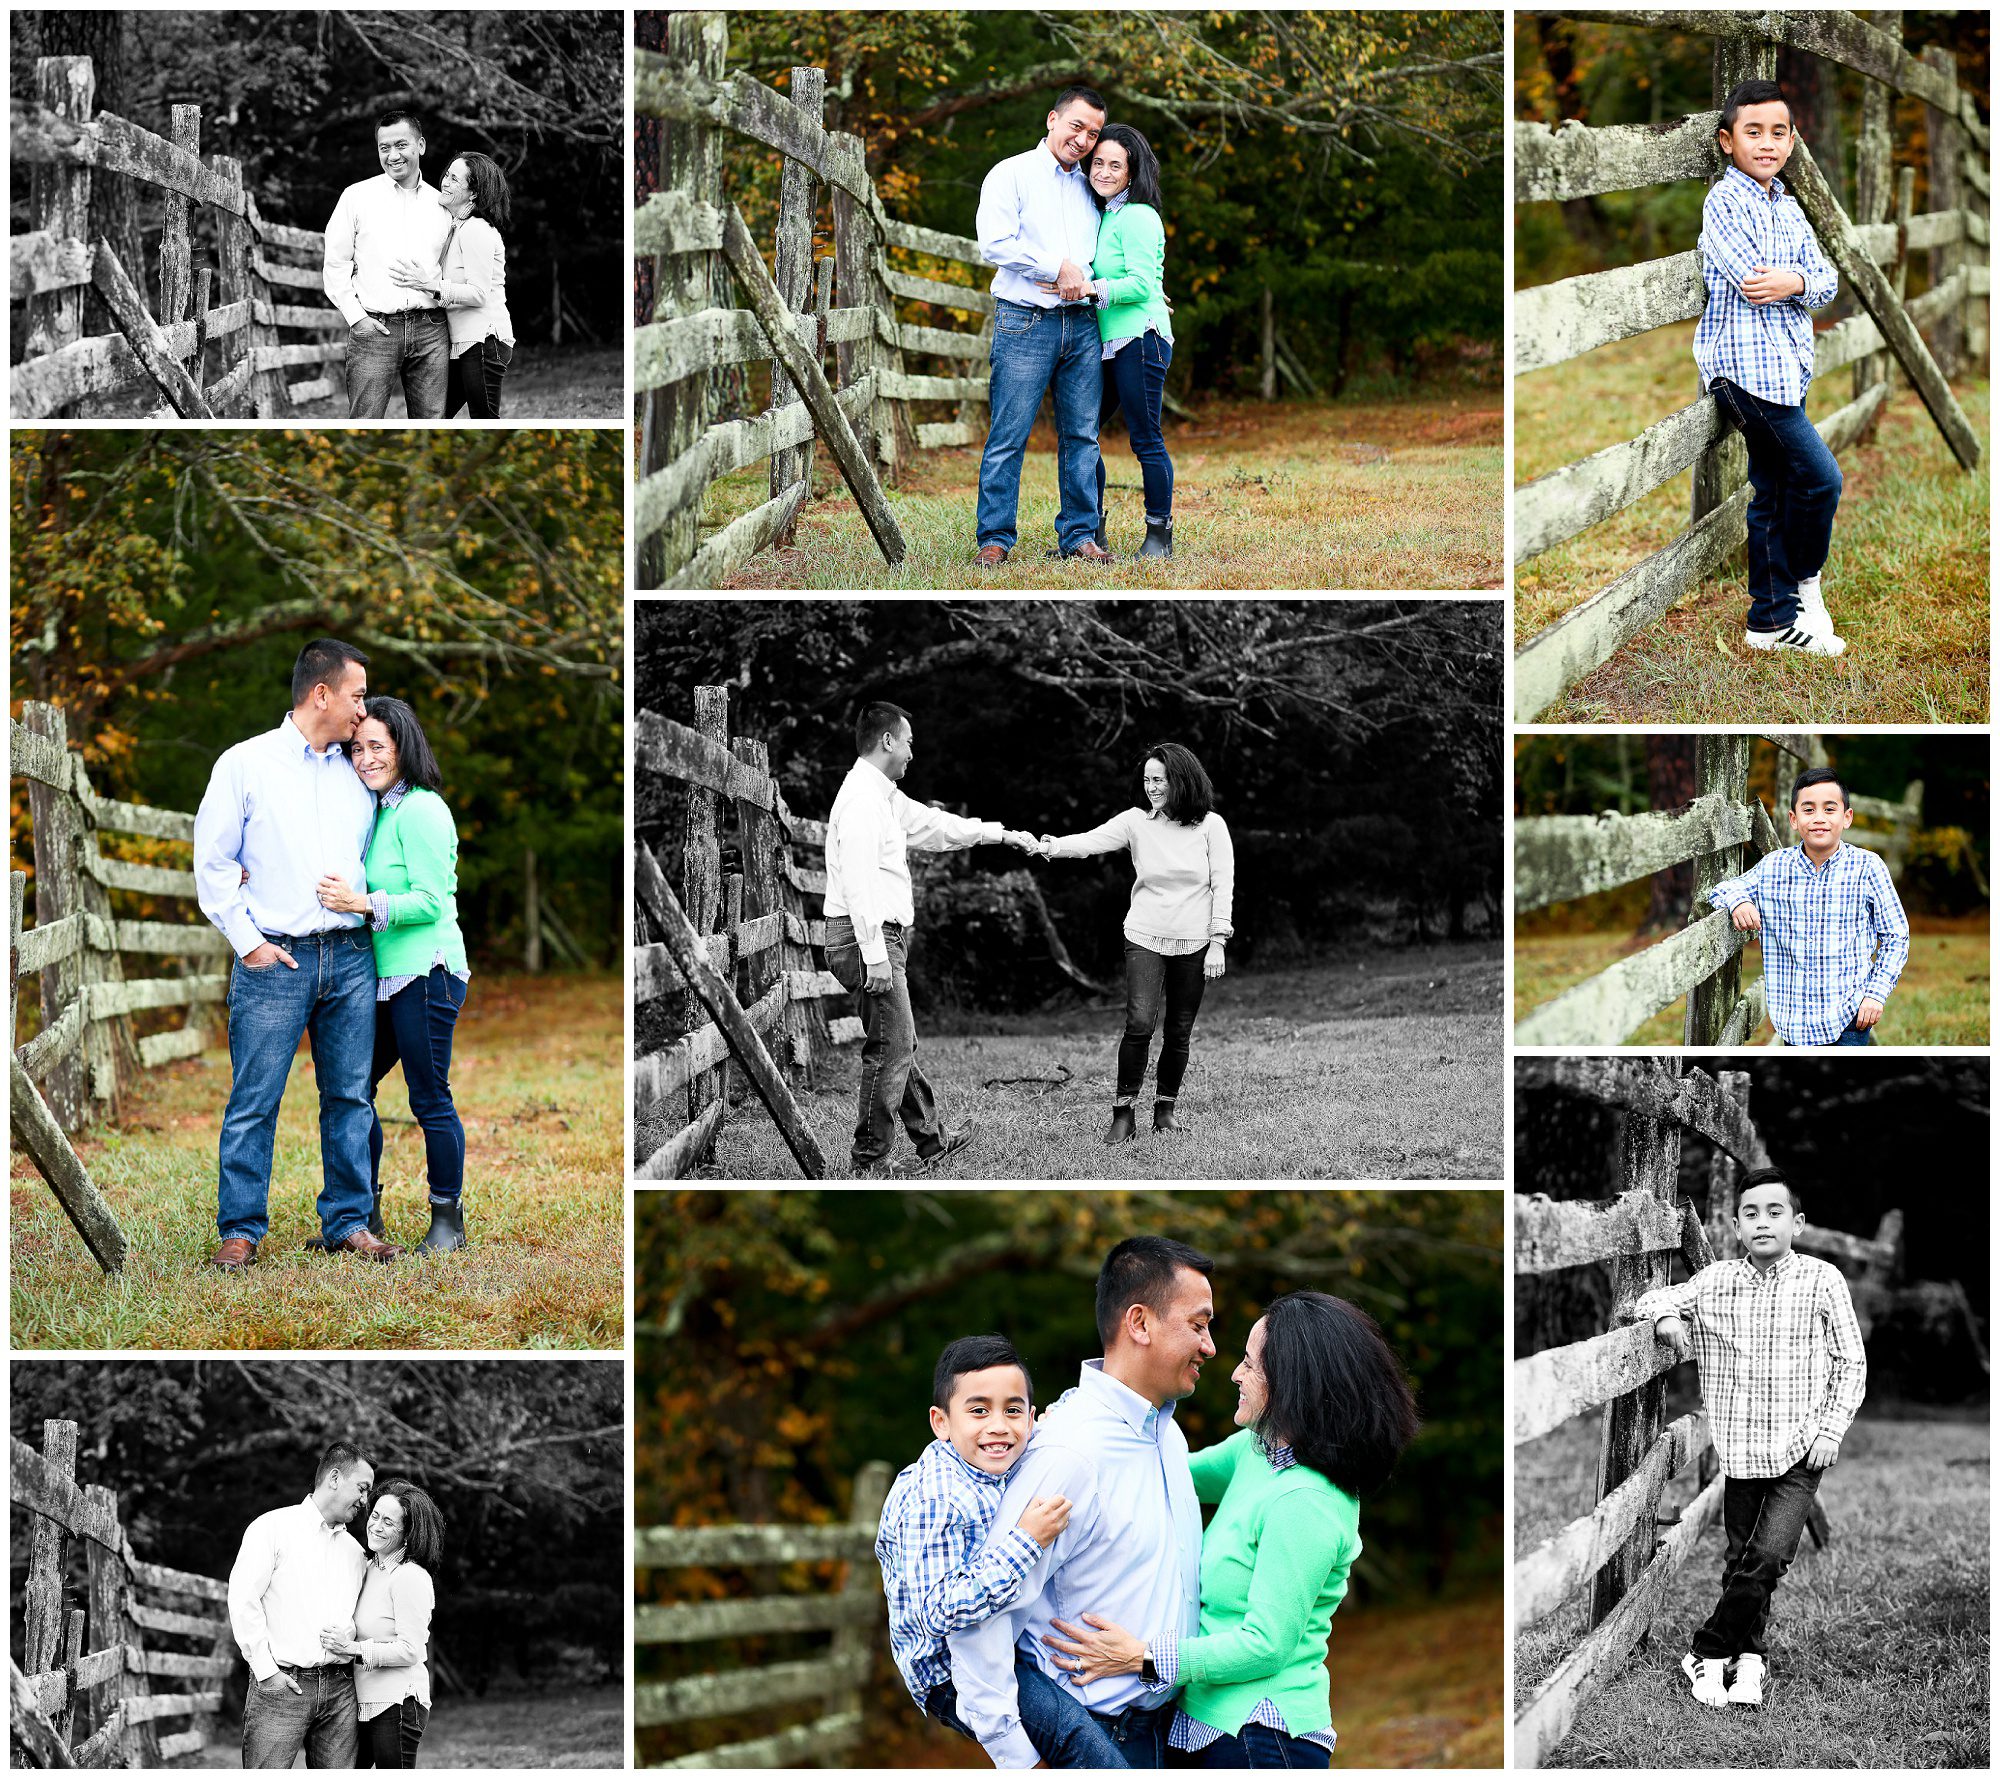 Lake Monticello Fall Family Portraits Fluvanna pleasant grove charlottesville photography pictures photographer cville fun son parents together autumn